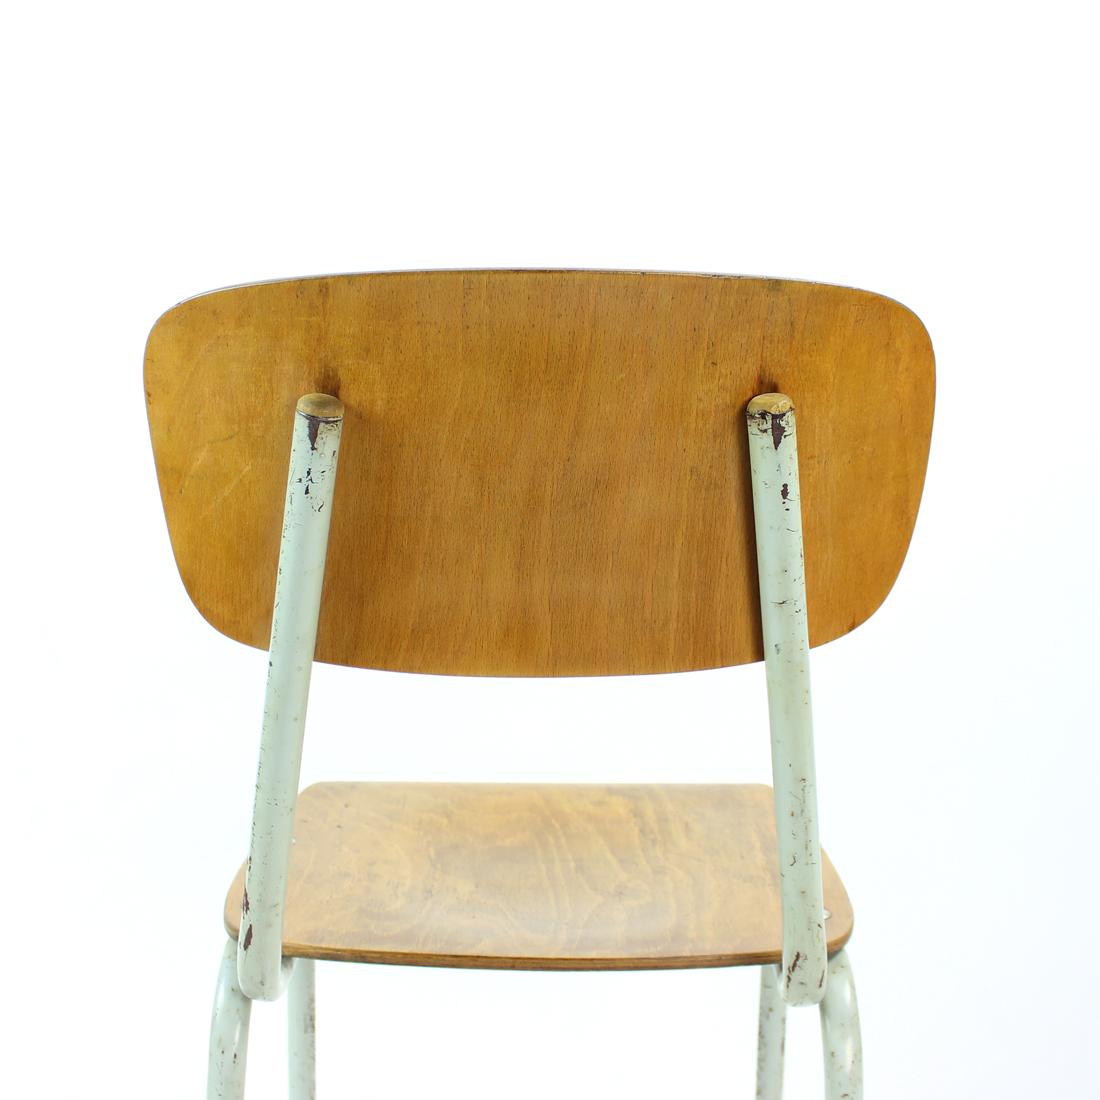 School Chair In Metal And Plywood, Kovona, Czechoslovakia 1960s For Sale 5